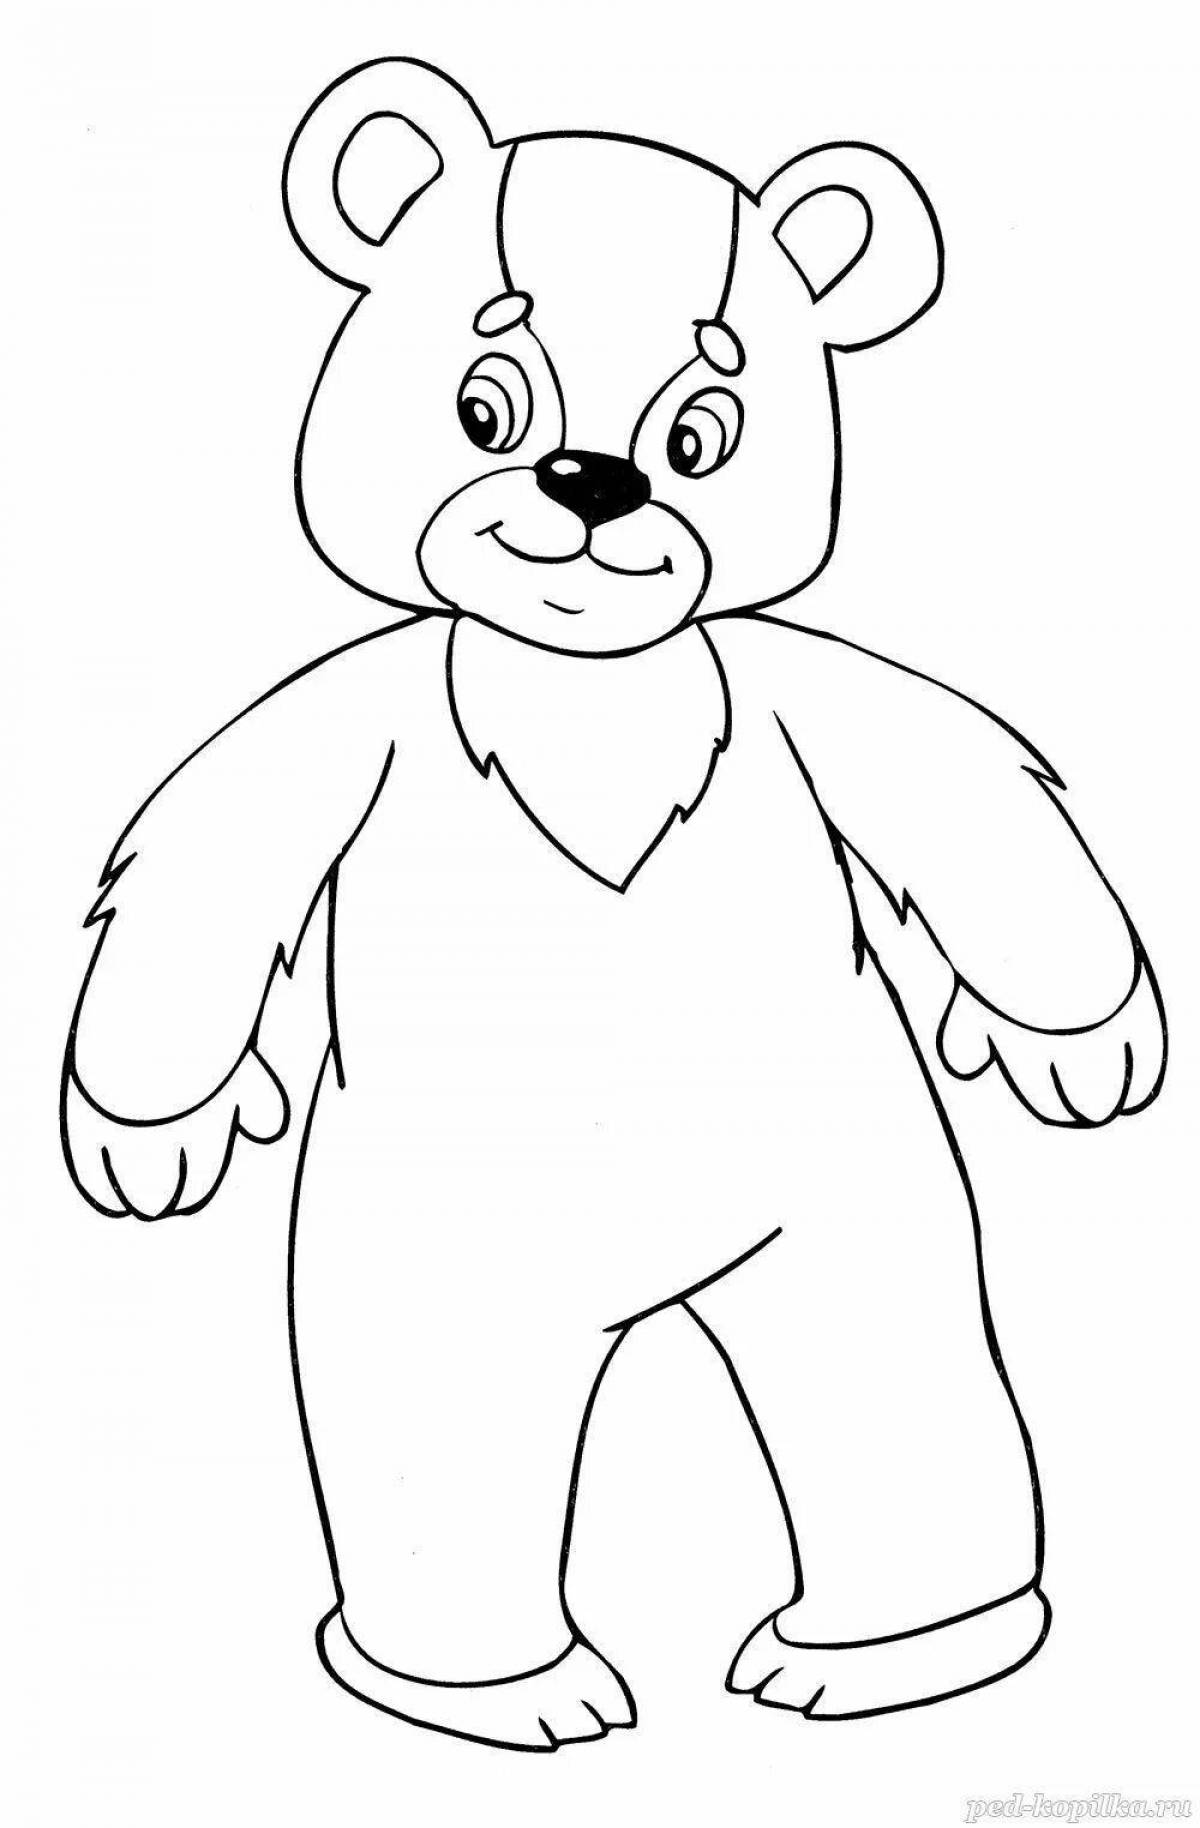 Cute teddy bear in baby pants coloring page